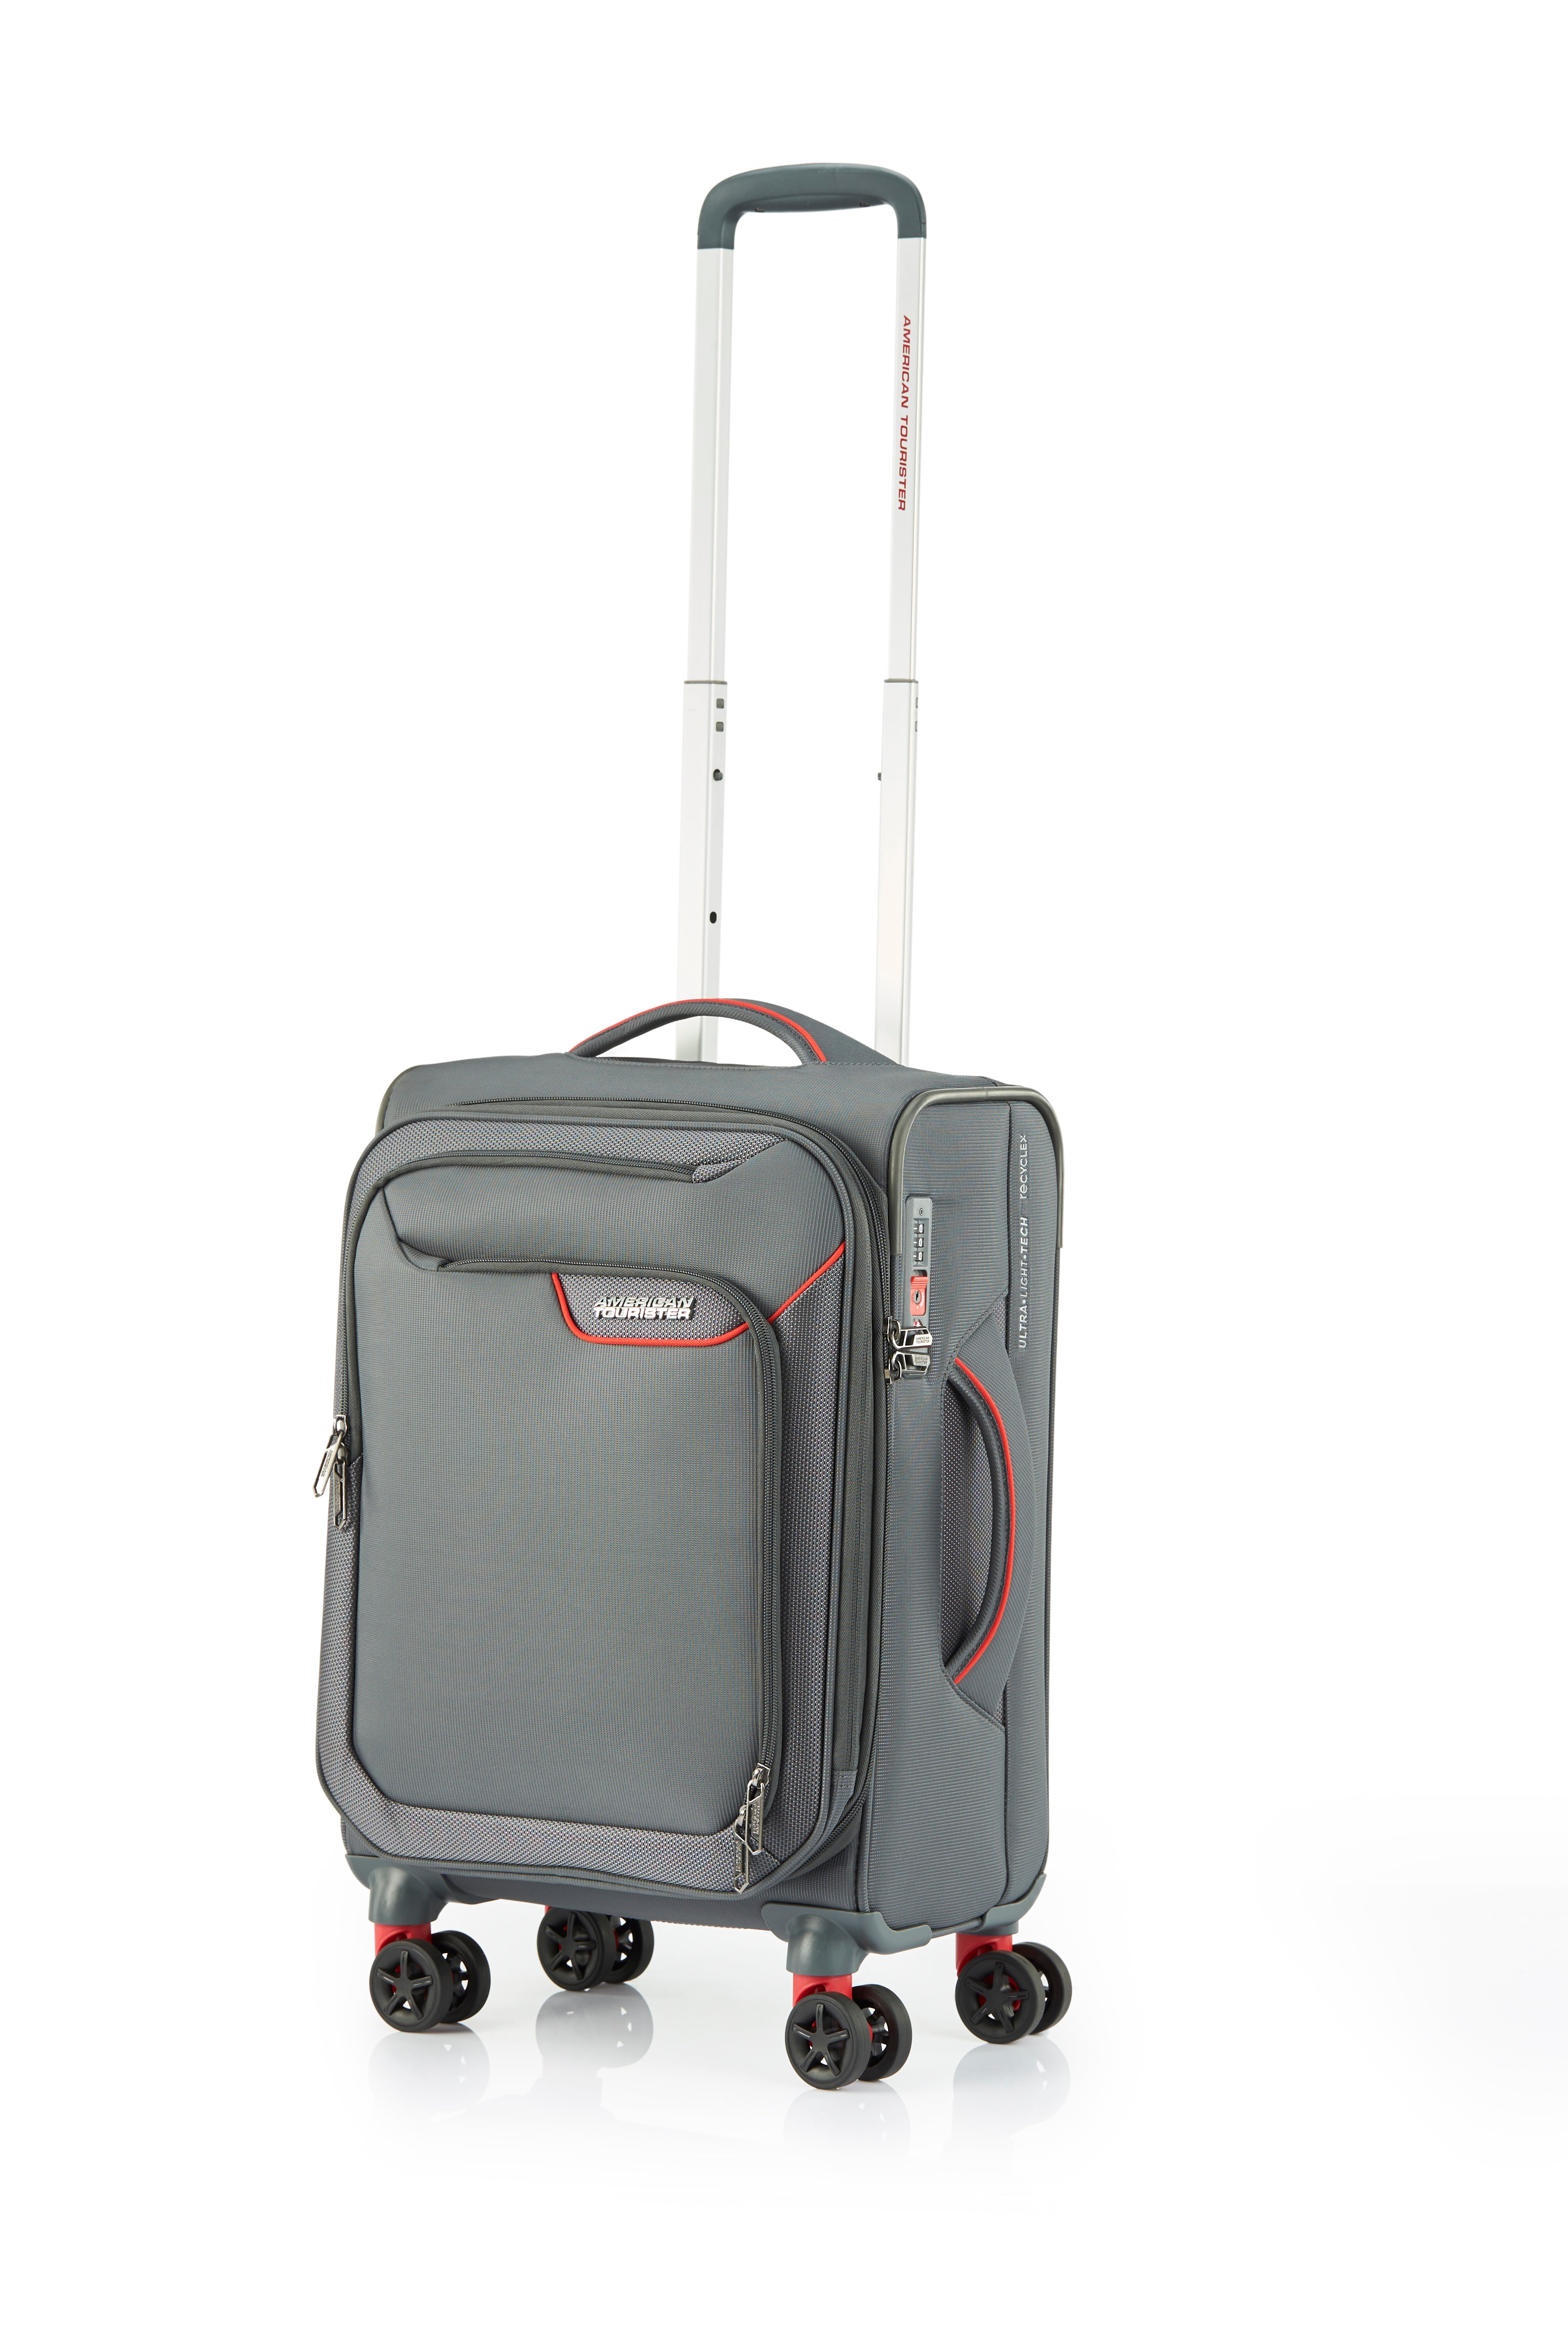 American Tourister - Applite ECO 55cm Small Suitcase - Grey/Red-1